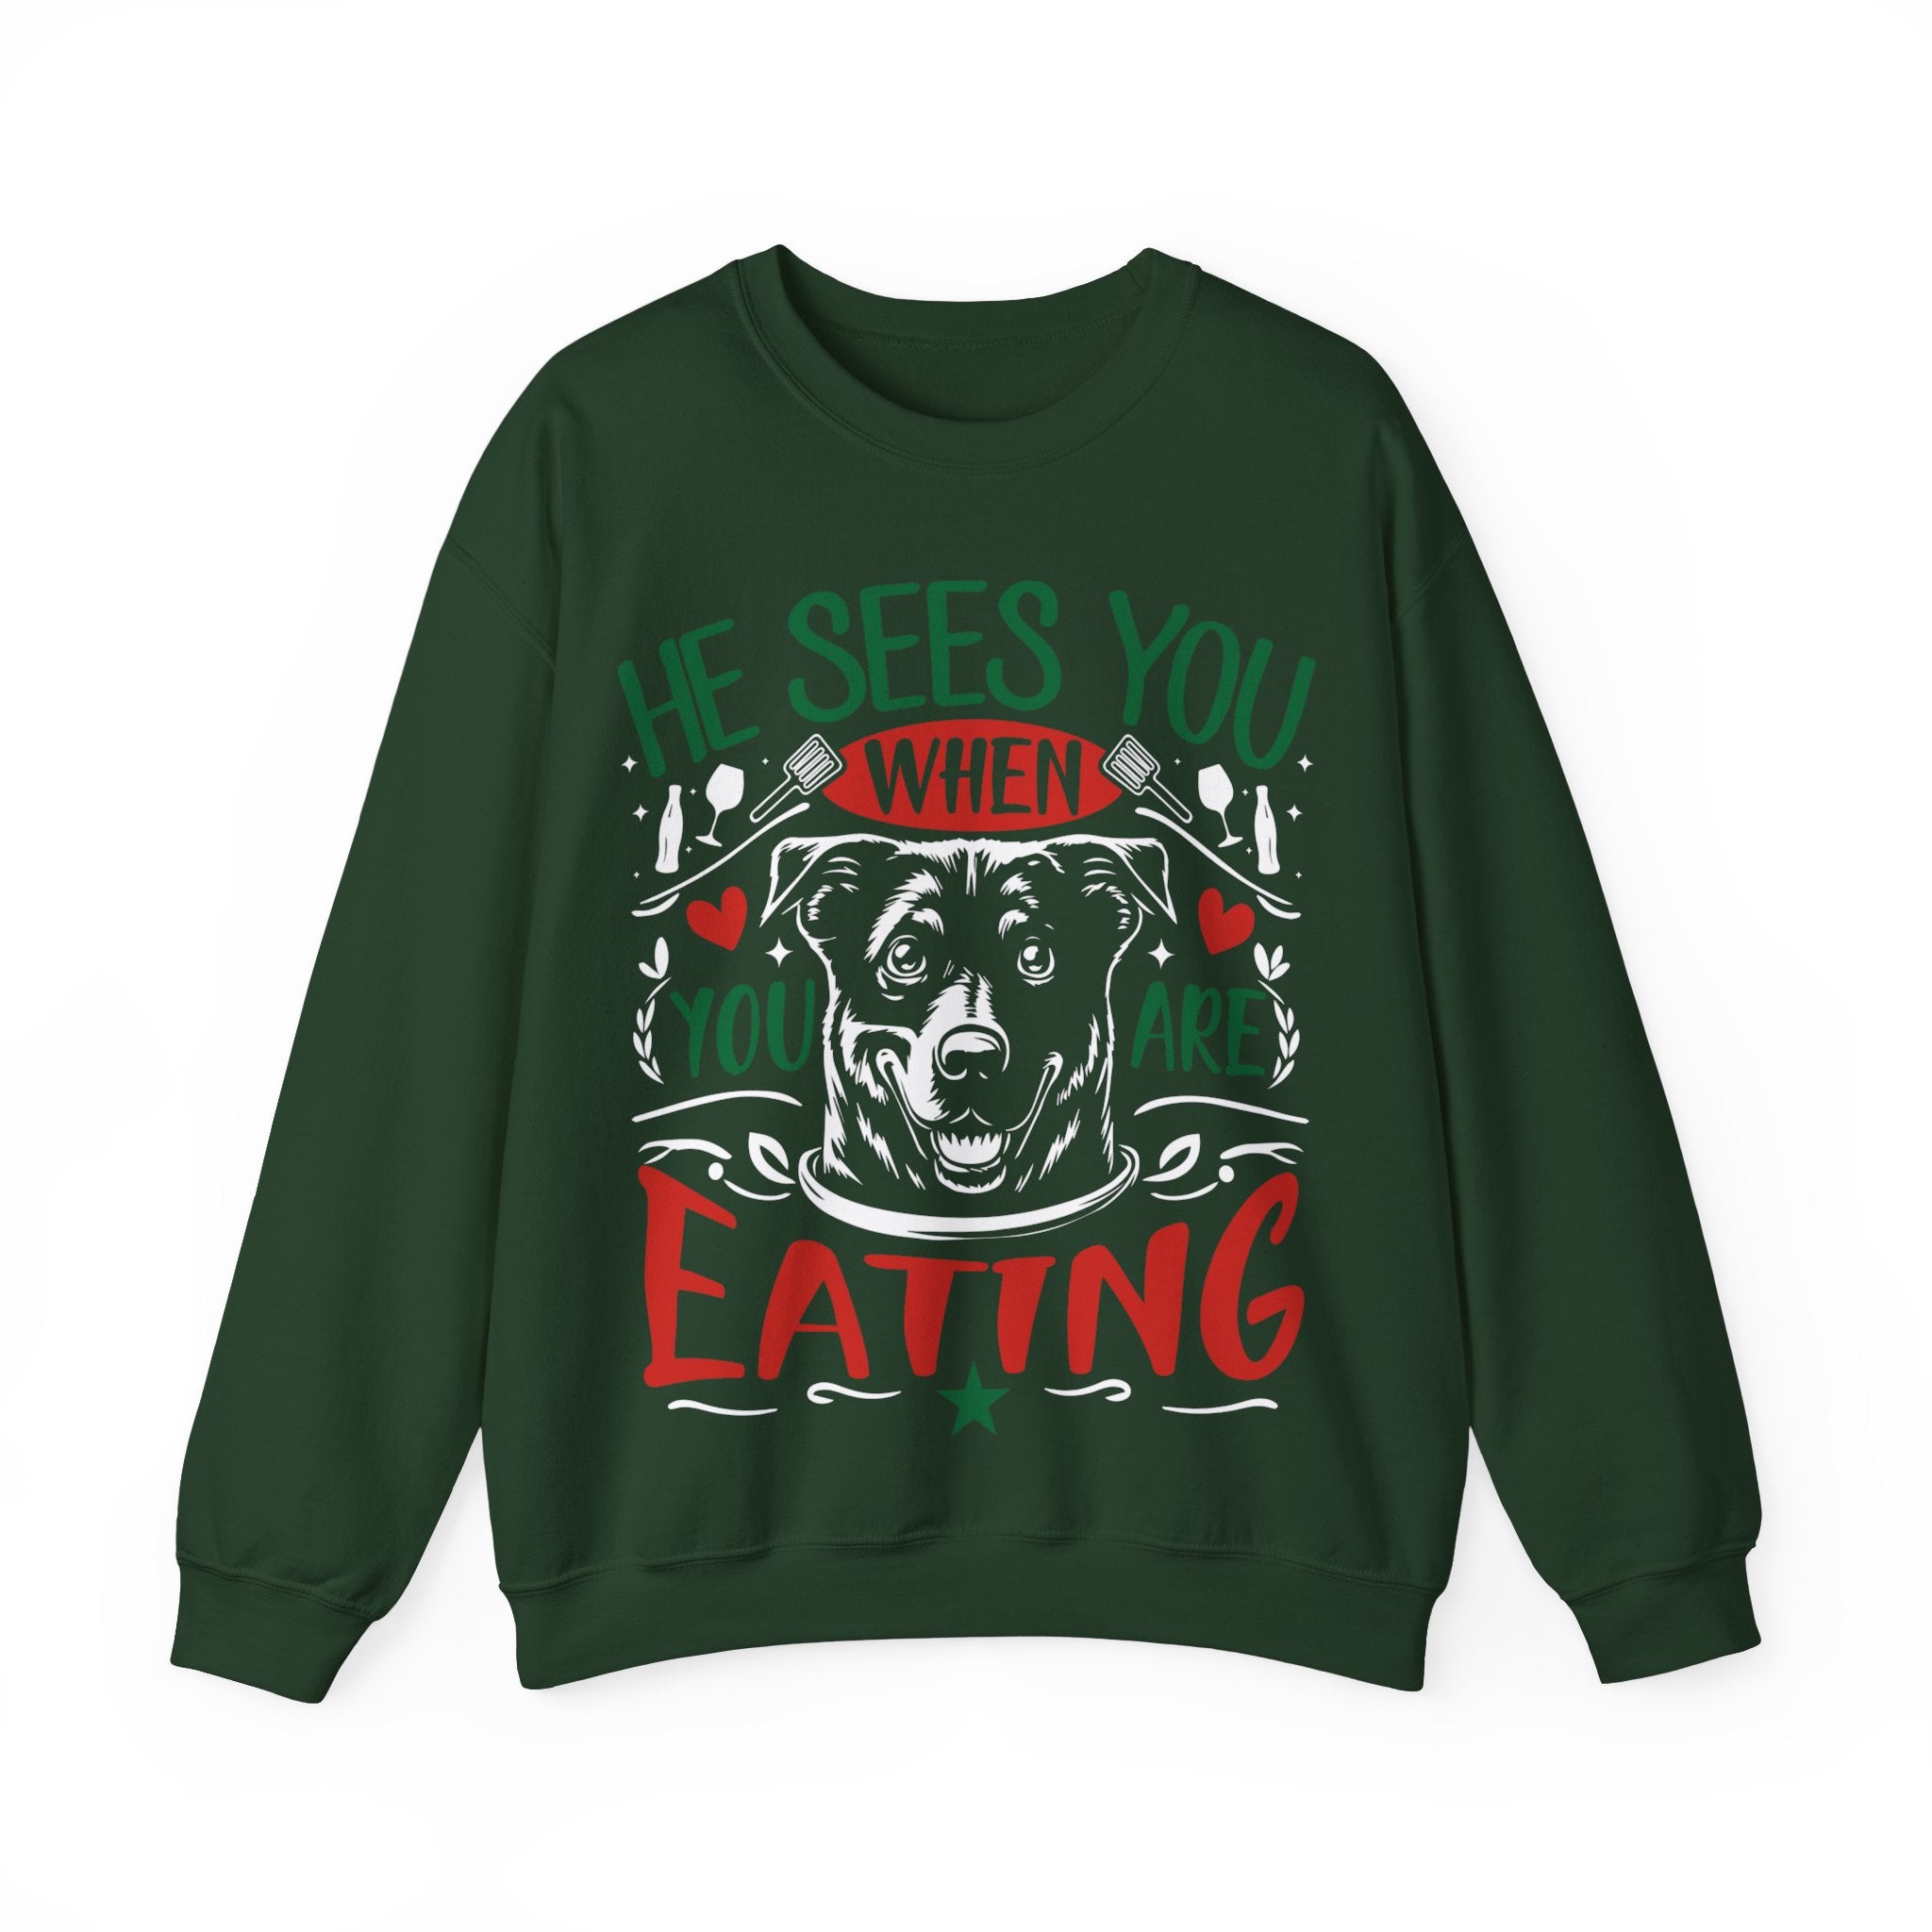 "He Sees You When You Are Eating" Christmas Sweatshirt